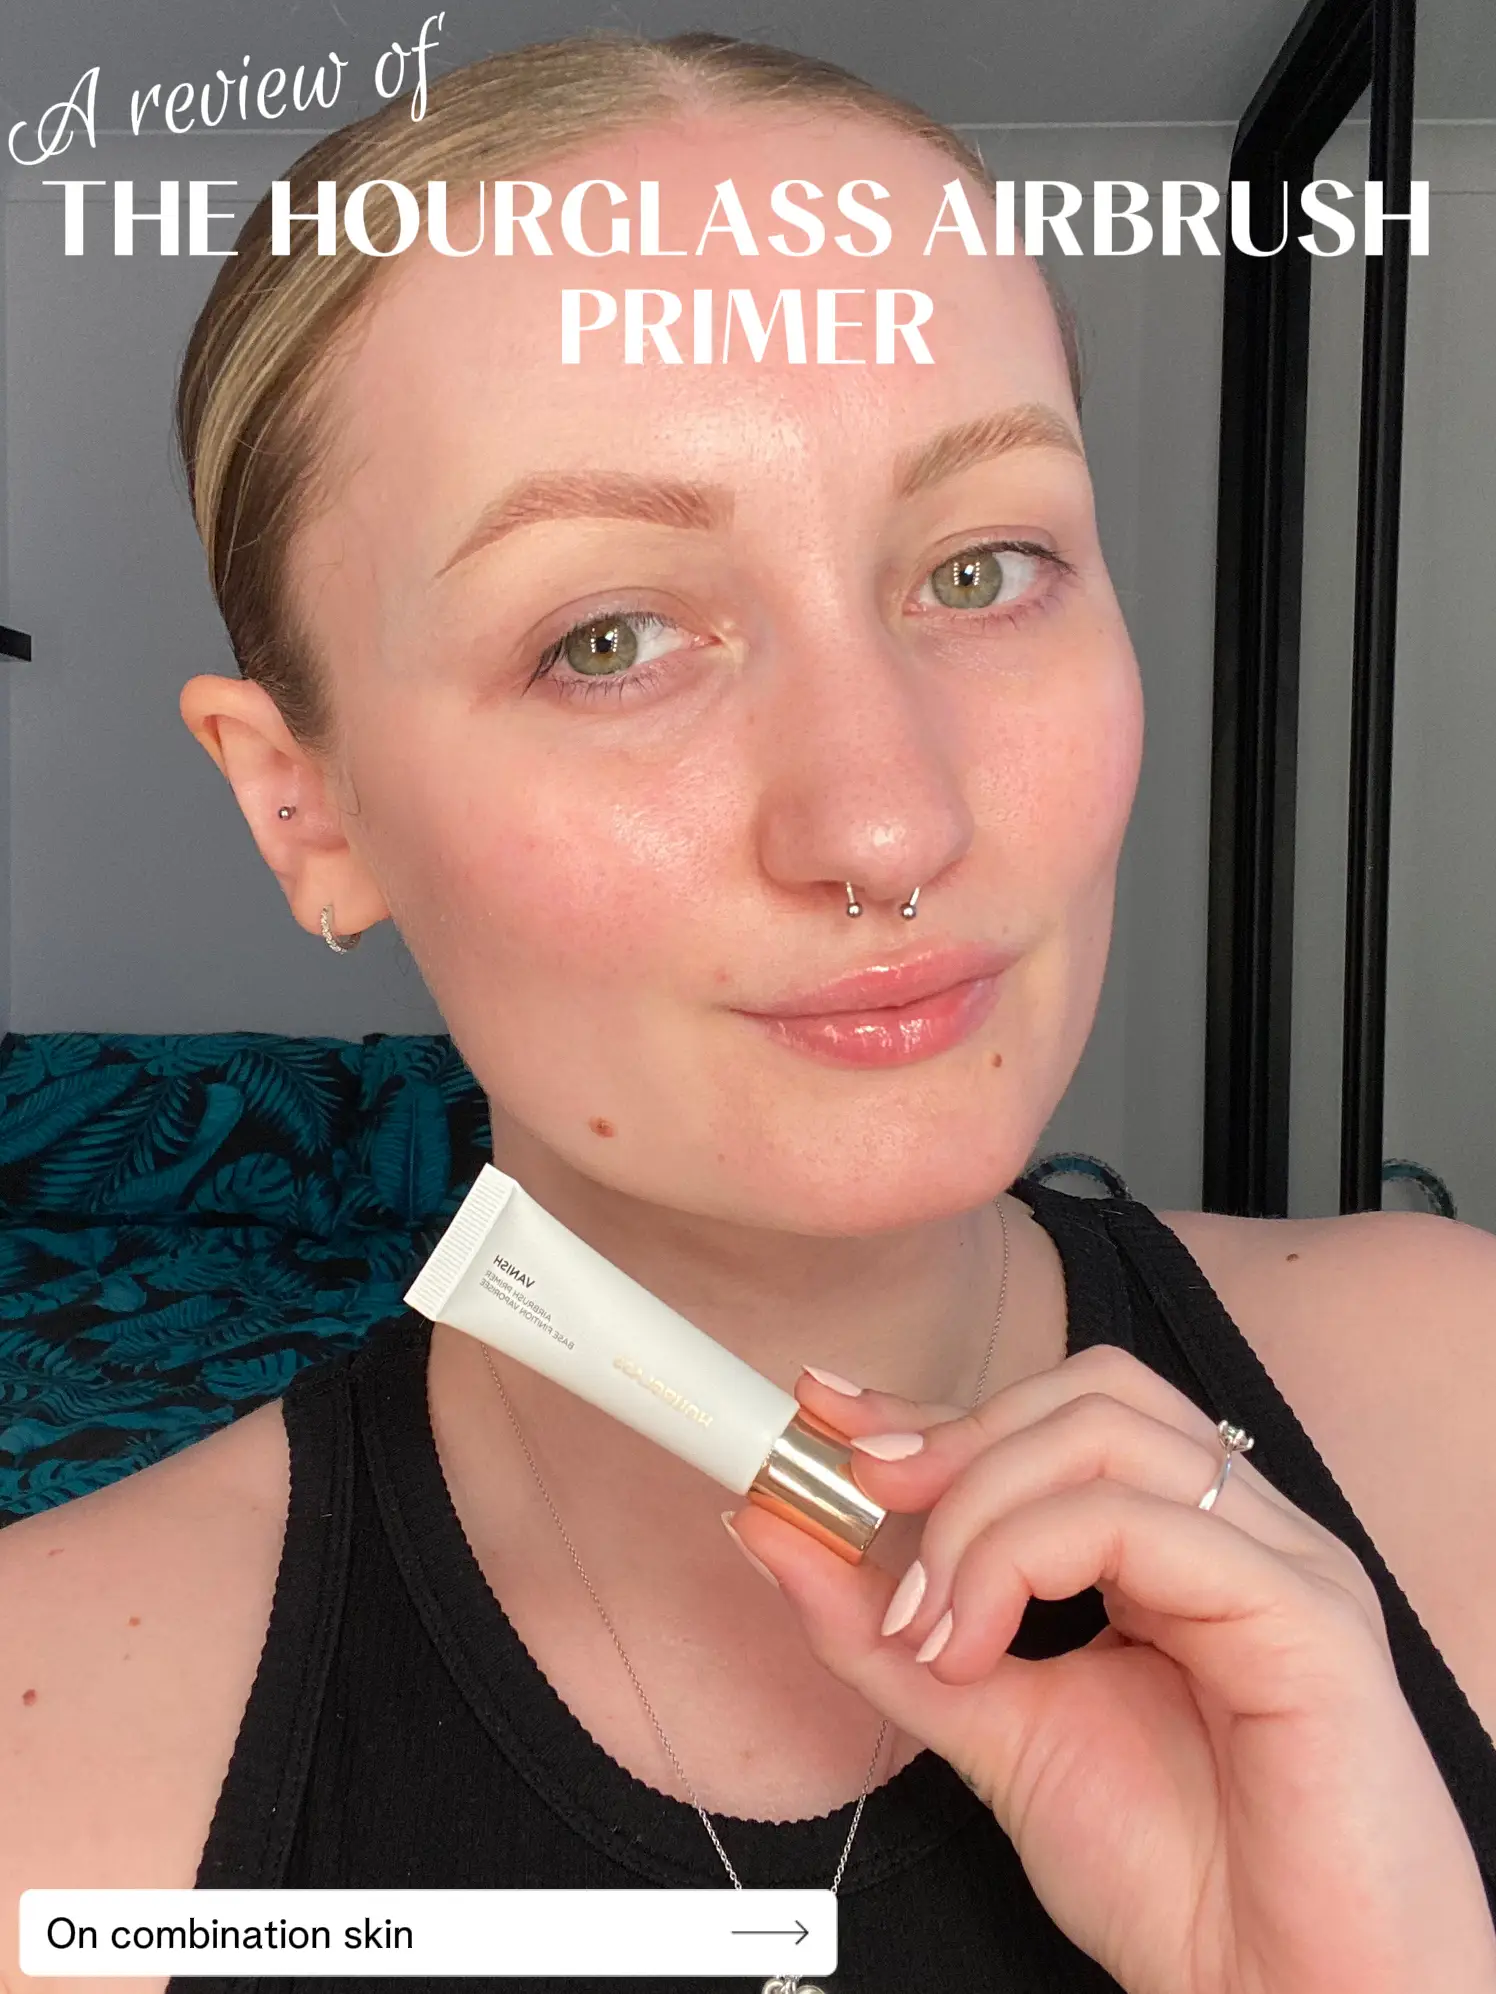 HOURGLASS AIRBRUSH PRIMER REVIEW, Gallery posted by Ellen Davis